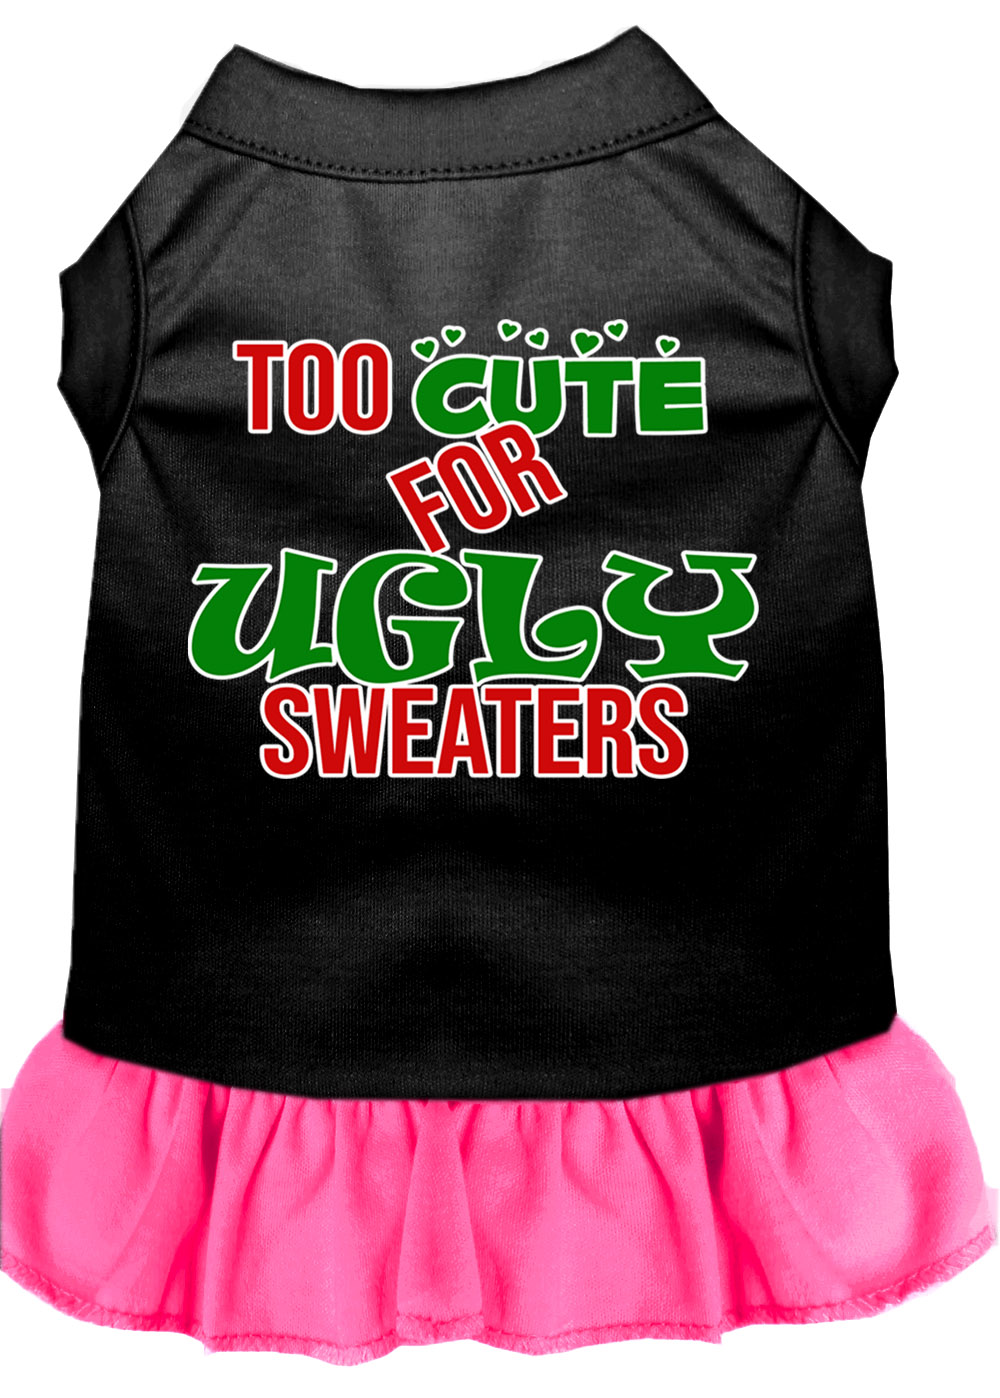 Too Cute for Ugly Sweaters Screen Print Dog Dress Black with Bright Pink XXXL